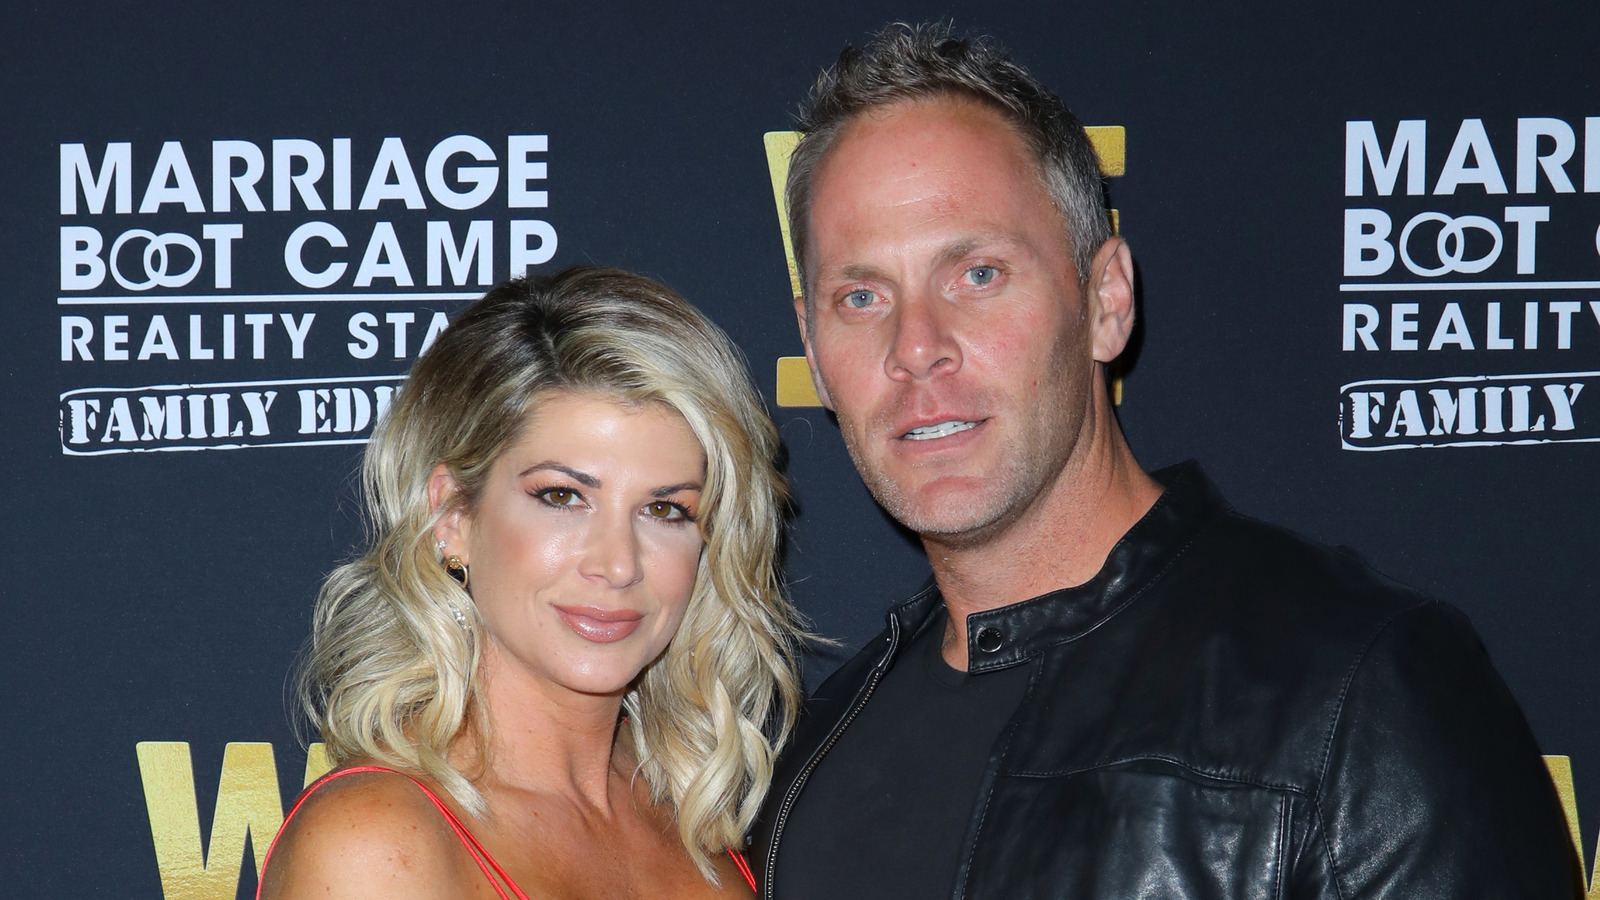 The unsaid truth of Alexis Bellino's New Relationship